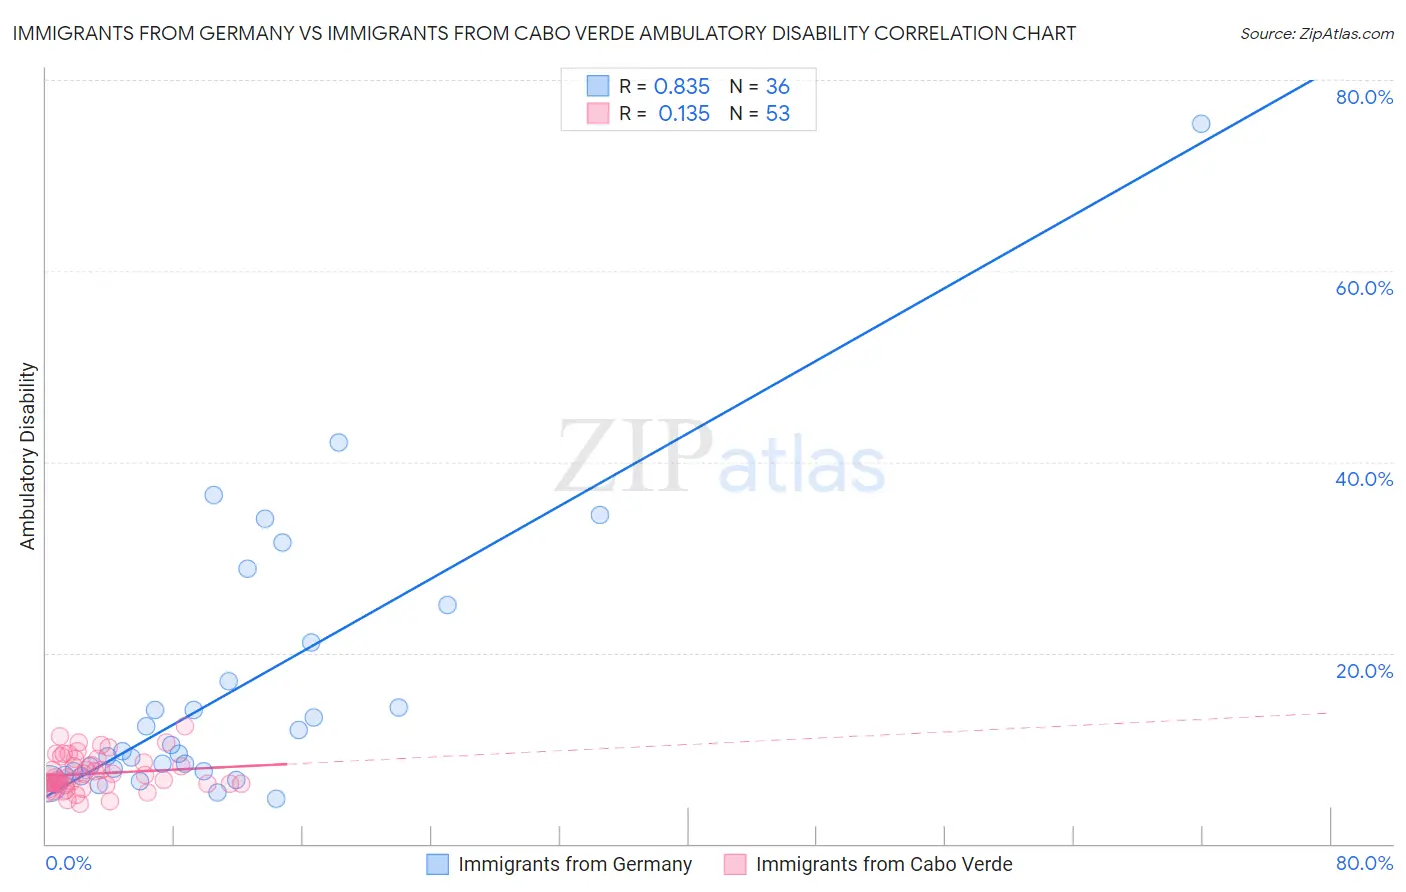 Immigrants from Germany vs Immigrants from Cabo Verde Ambulatory Disability